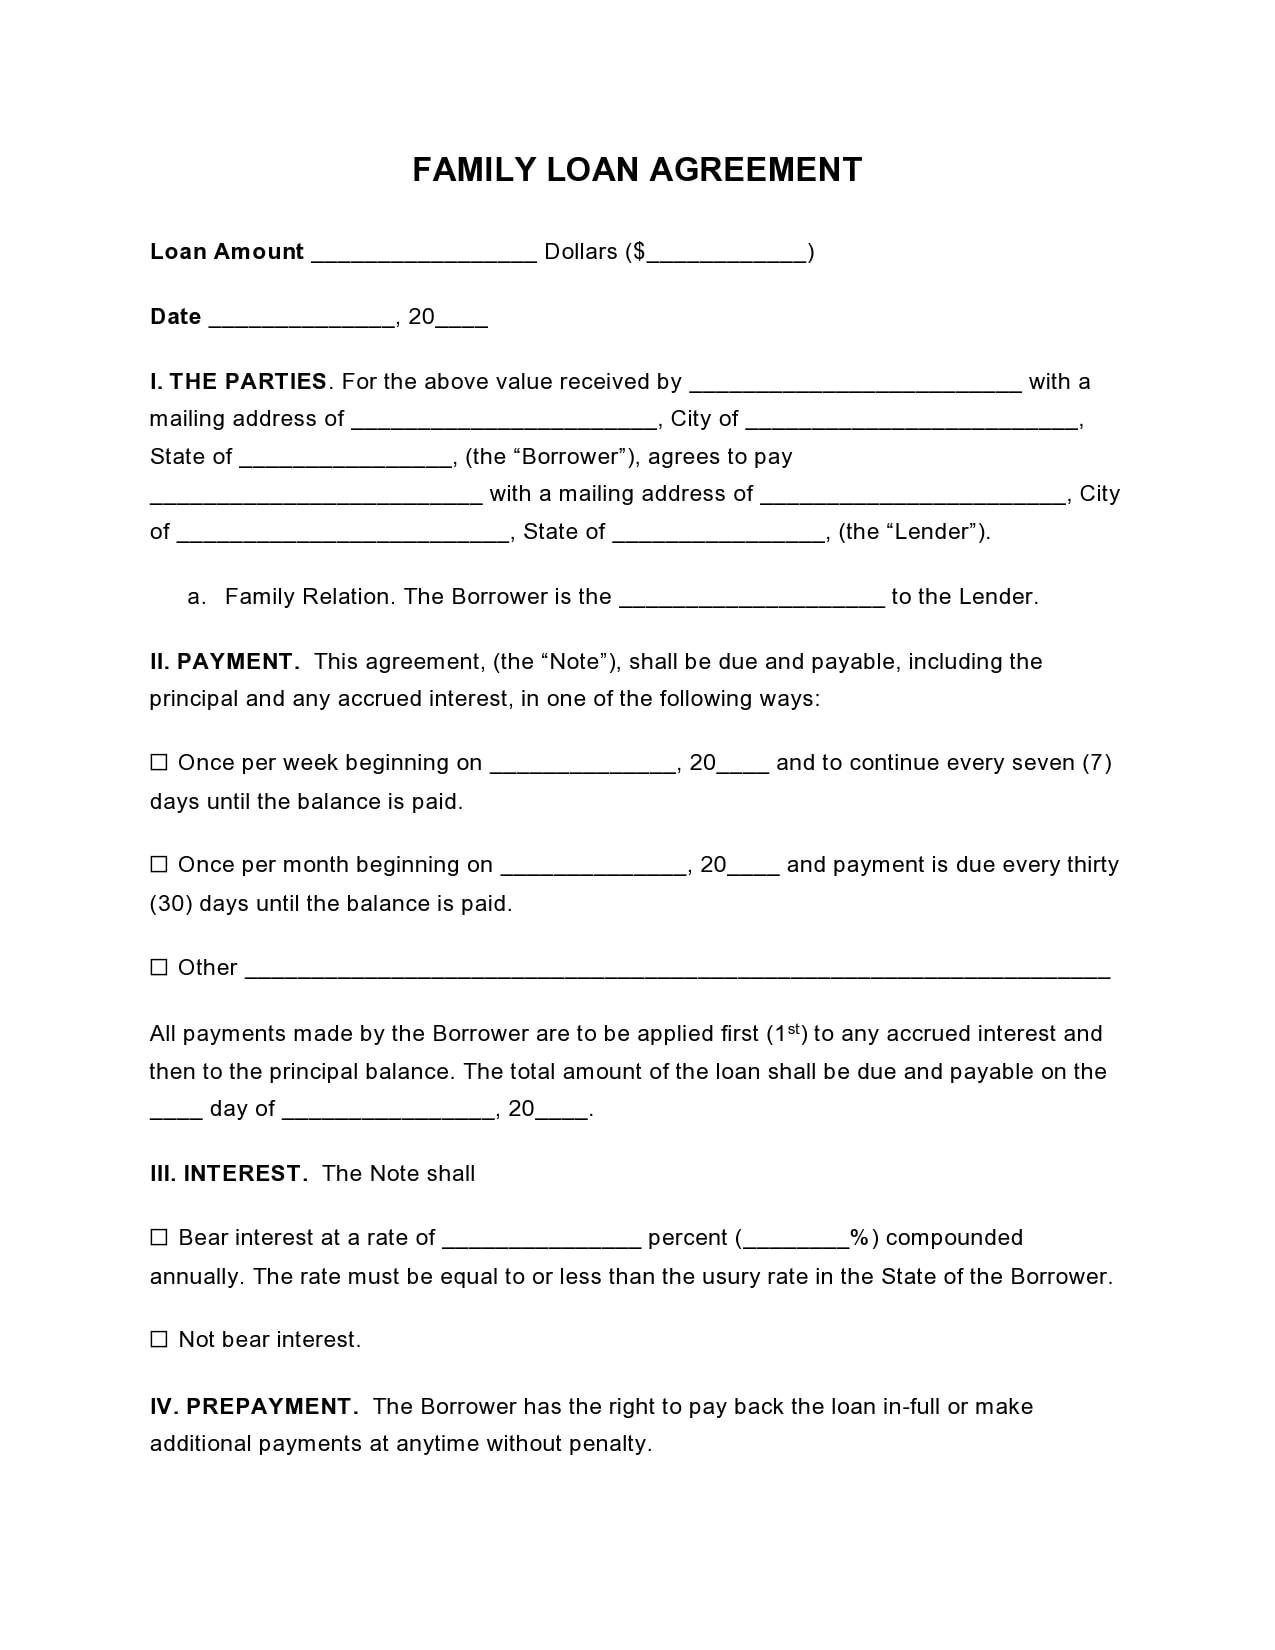 22 Simple Family Loan Agreement Templates (22% Free) With Regard To Blank Loan Agreement Template